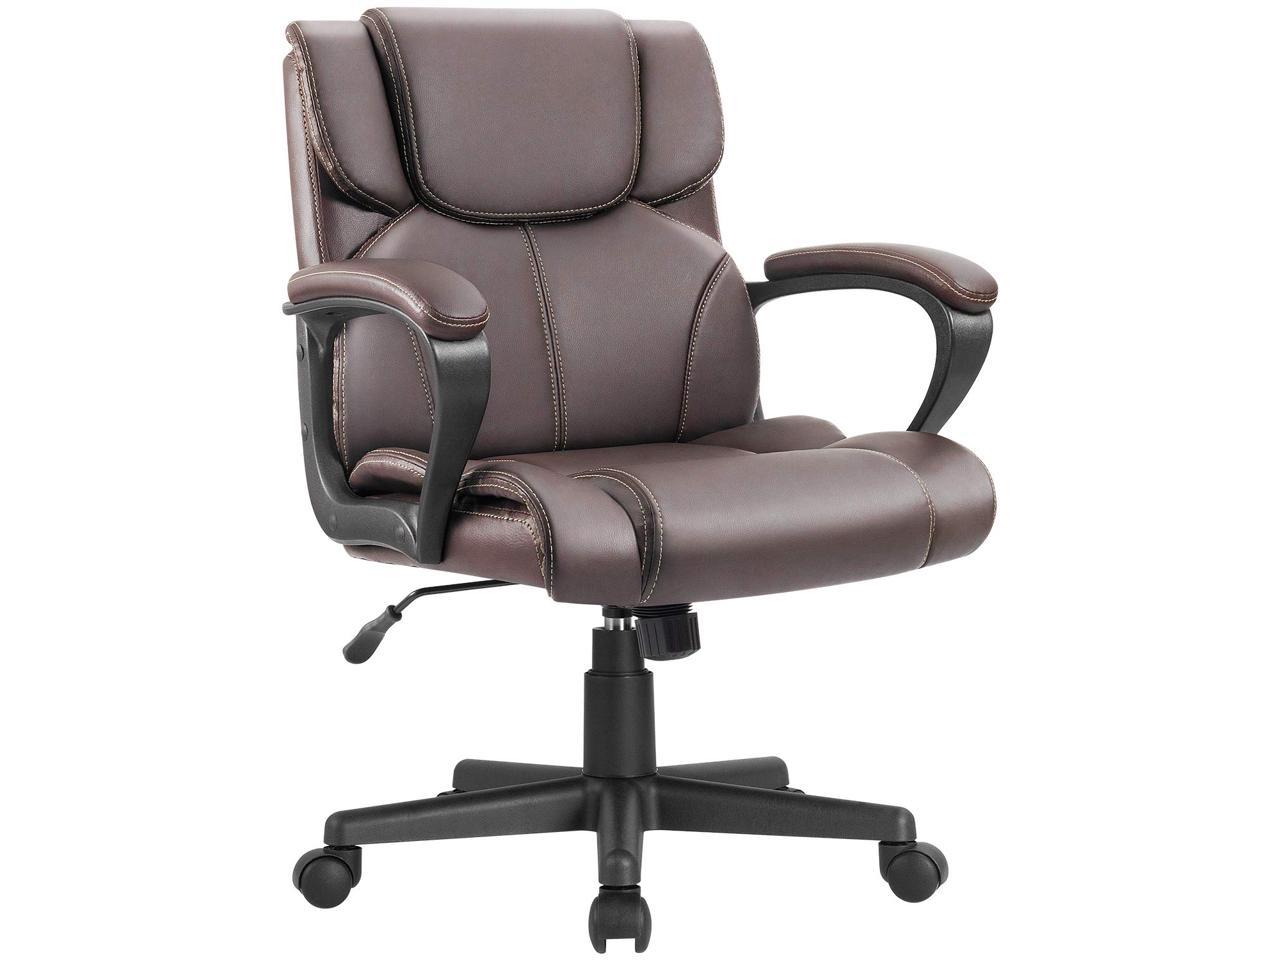 Furmax Mid Back Executive Office Chair Leather-Padded Desk Chair with ...